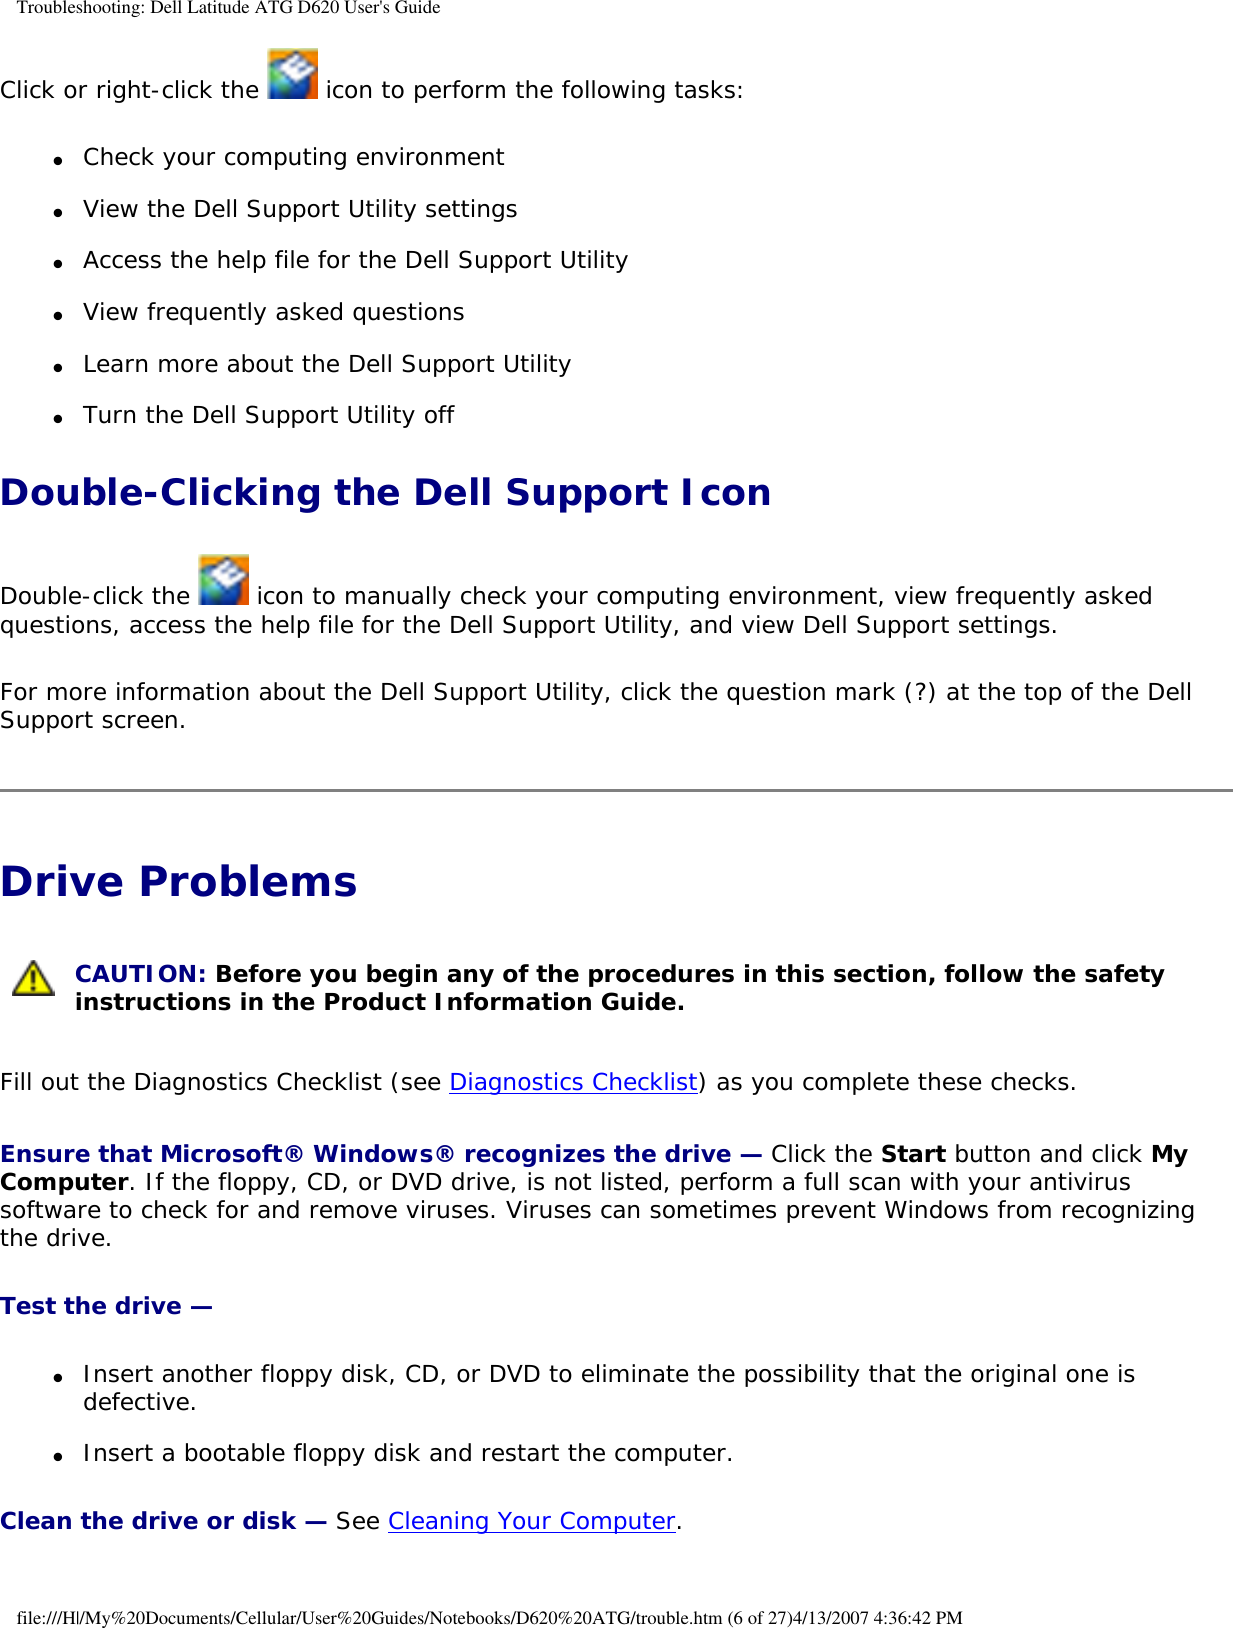 Troubleshooting: Dell Latitude ATG D620 User&apos;s GuideClick or right-click the   icon to perform the following tasks:●     Check your computing environment   ●     View the Dell Support Utility settings  ●     Access the help file for the Dell Support Utility  ●     View frequently asked questions  ●     Learn more about the Dell Support Utility  ●     Turn the Dell Support Utility off  Double-Clicking the Dell Support IconDouble-click the   icon to manually check your computing environment, view frequently asked questions, access the help file for the Dell Support Utility, and view Dell Support settings.For more information about the Dell Support Utility, click the question mark (?) at the top of the Dell Support screen.Drive Problems  CAUTION: Before you begin any of the procedures in this section, follow the safety instructions in the Product Information Guide. Fill out the Diagnostics Checklist (see Diagnostics Checklist) as you complete these checks.Ensure that Microsoft® Windows® recognizes the drive — Click the Start button and click My Computer. If the floppy, CD, or DVD drive, is not listed, perform a full scan with your antivirus software to check for and remove viruses. Viruses can sometimes prevent Windows from recognizing the drive.Test the drive — ●     Insert another floppy disk, CD, or DVD to eliminate the possibility that the original one is defective.  ●     Insert a bootable floppy disk and restart the computer.  Clean the drive or disk — See Cleaning Your Computer.file:///H|/My%20Documents/Cellular/User%20Guides/Notebooks/D620%20ATG/trouble.htm (6 of 27)4/13/2007 4:36:42 PM